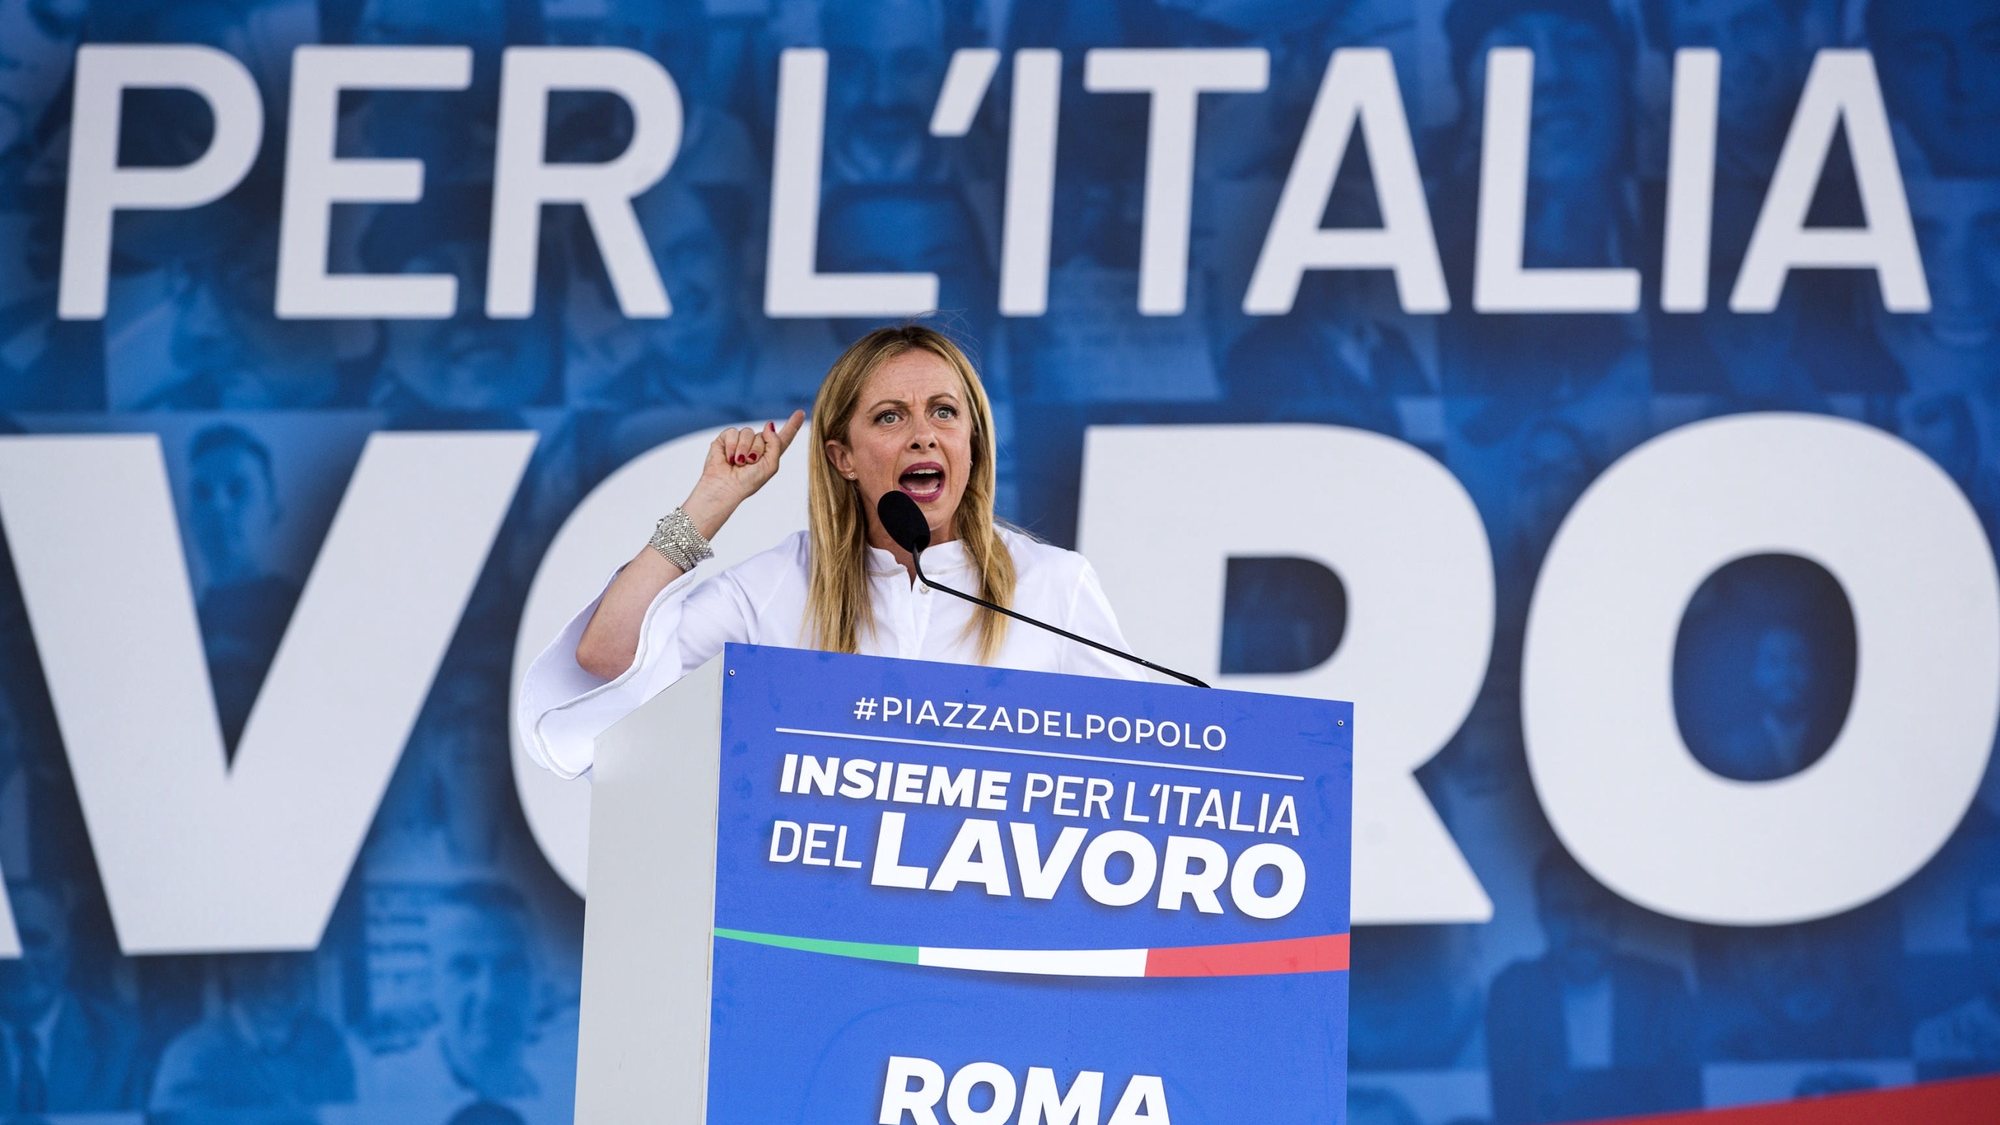 epa08526177 The leader of the right-populist Fratelli d&#039;Italia (&#039;Brothers of Italy&#039;) party, Giorgia Meloni, speaks at a joint rally staged by Italy&#039;s three main right-wing parties (Liga, Brothers of Italy and Forza Italia) at the Piazza del Popolo (&#039;People&#039;s Square&#039;) in downtown Rome, Italy, 04 July 2020.  EPA/ANGELO CARCONI